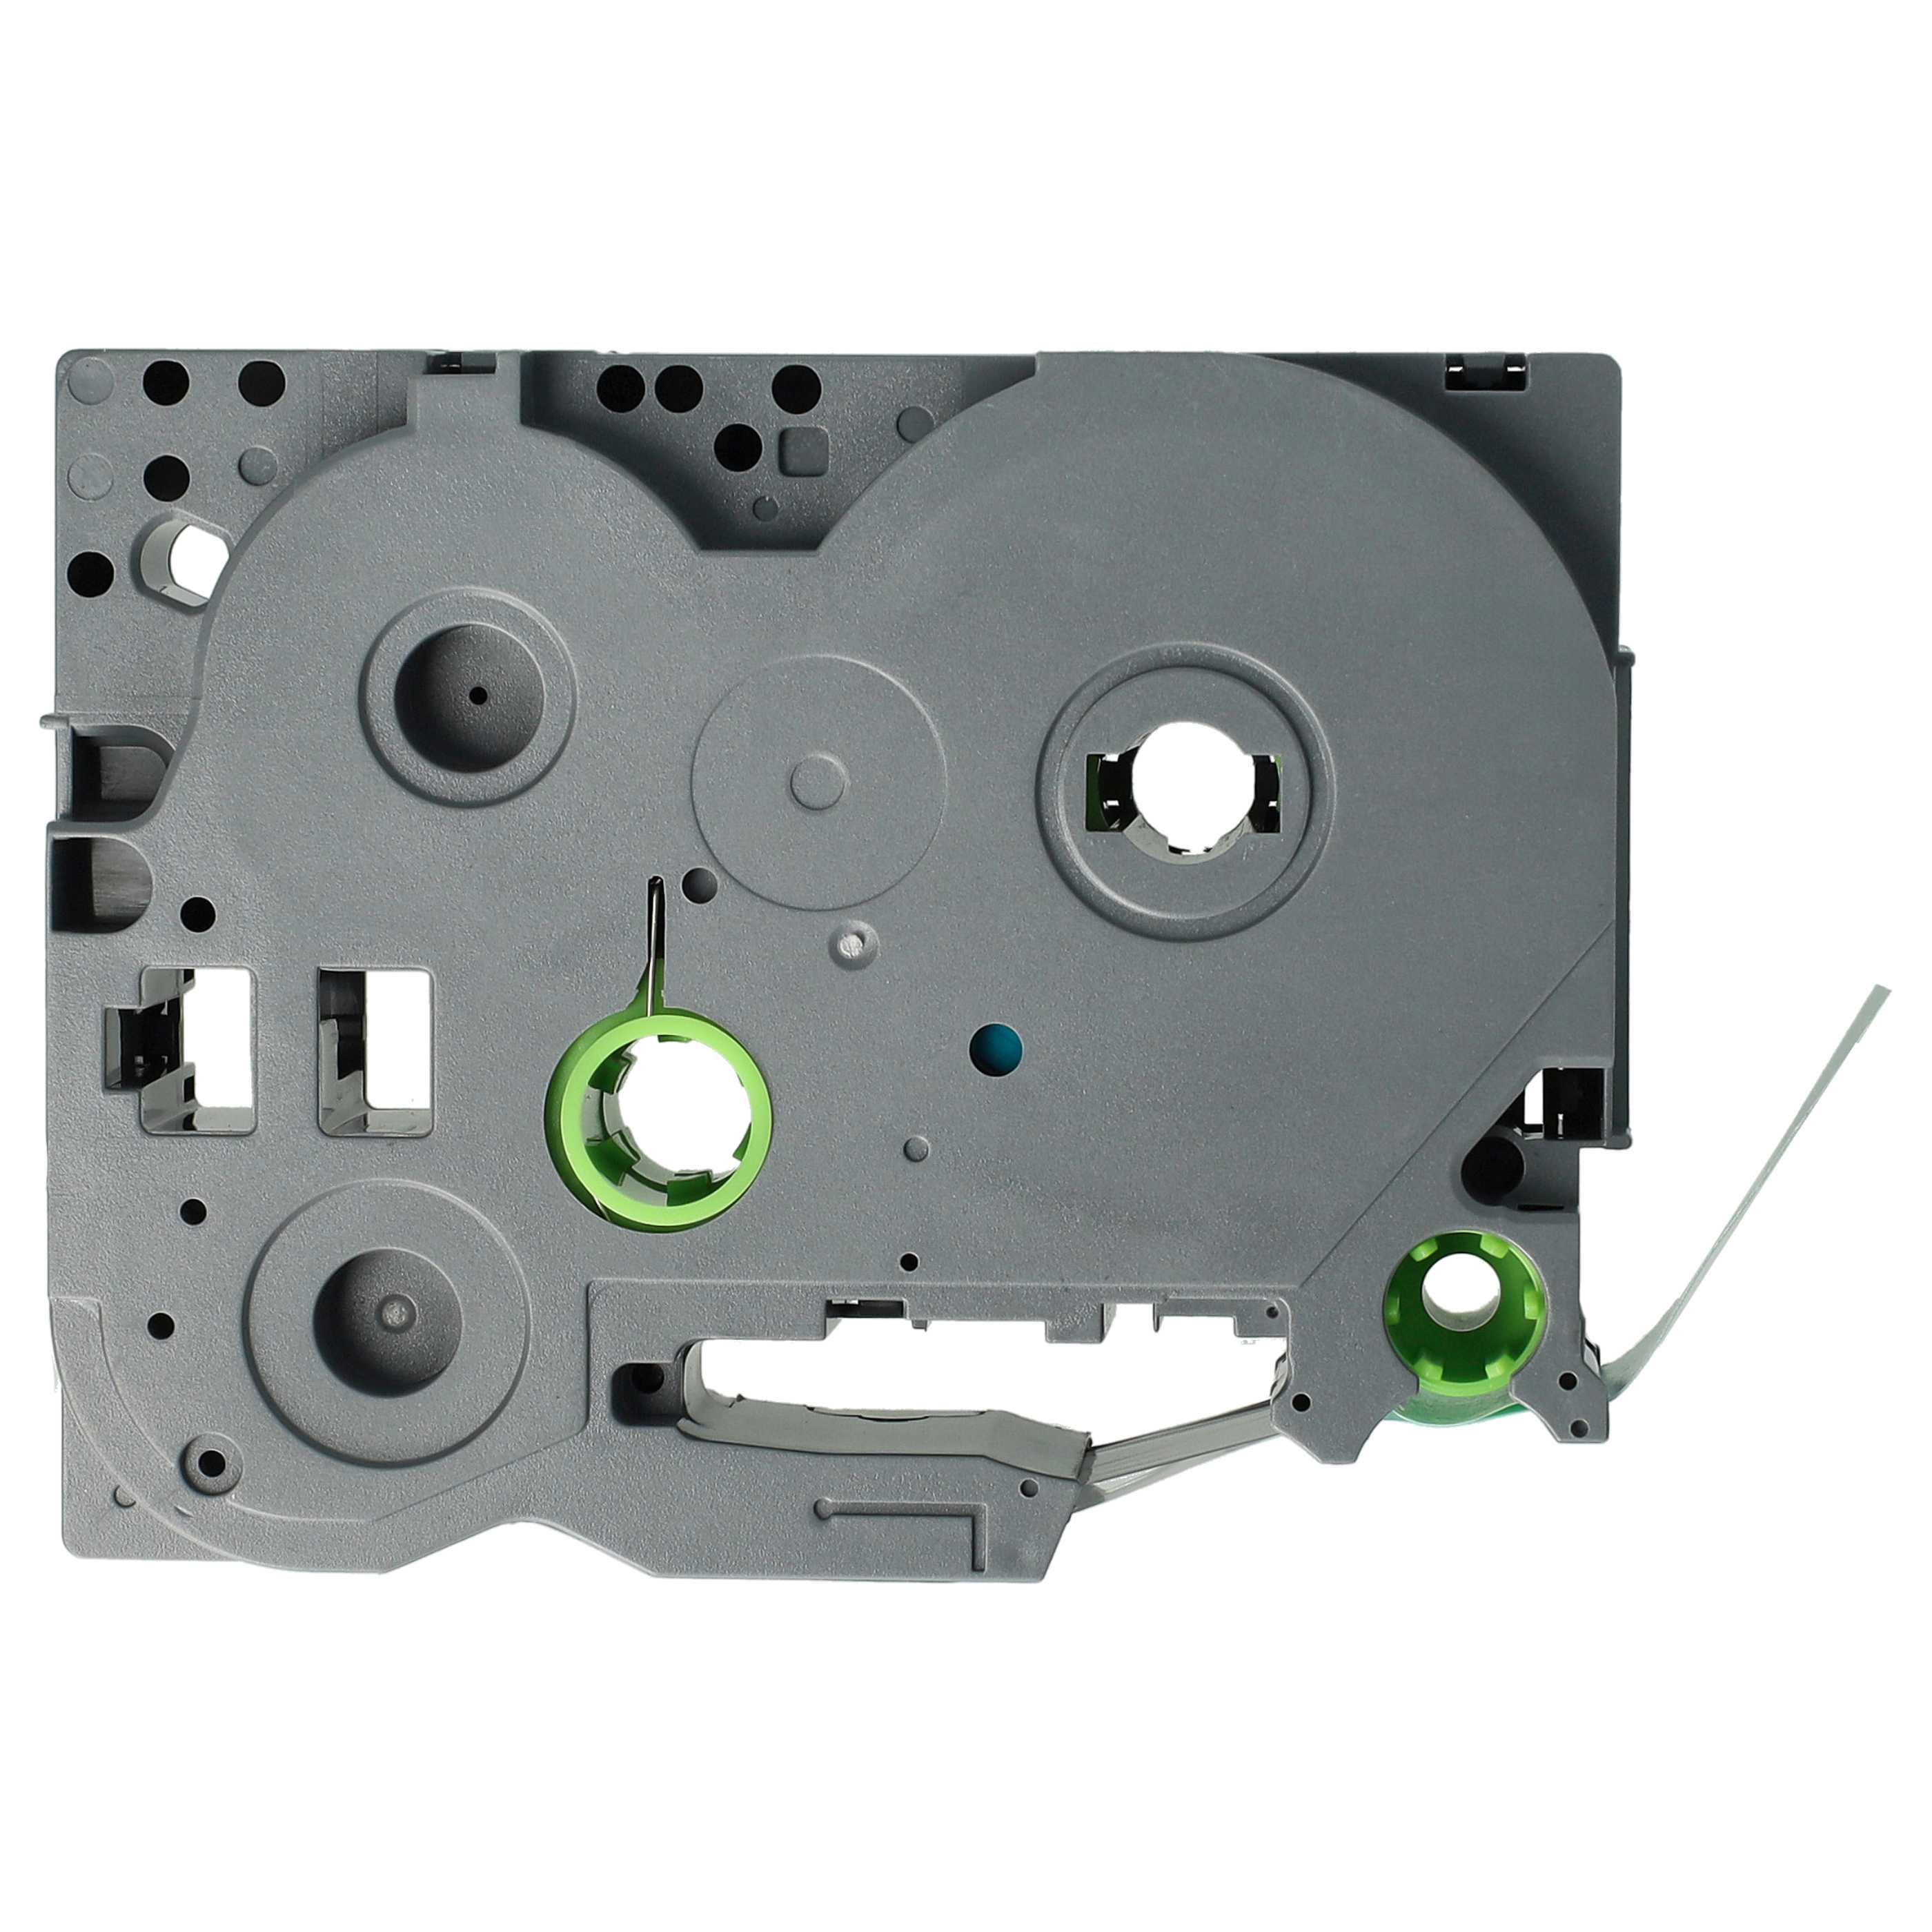 Label Tape as Replacement for Brother TZ-FX741, TZE-FX741, TZFX741, TZeFX741 - 18 mm Black to Green, Flexible